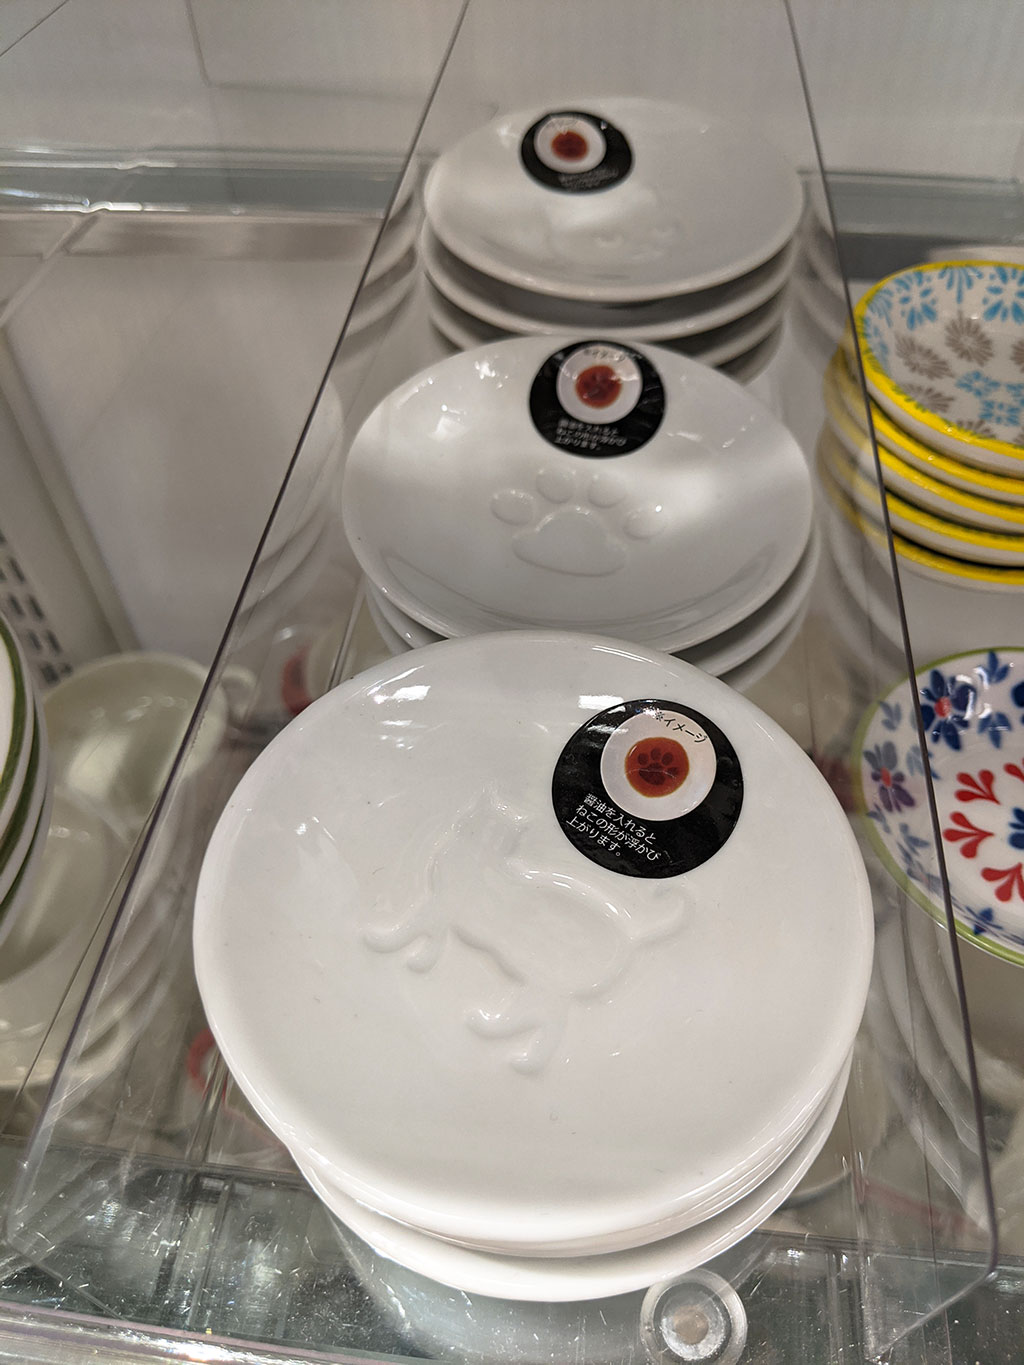 Oomomo Calgary cat paw dishes and plates